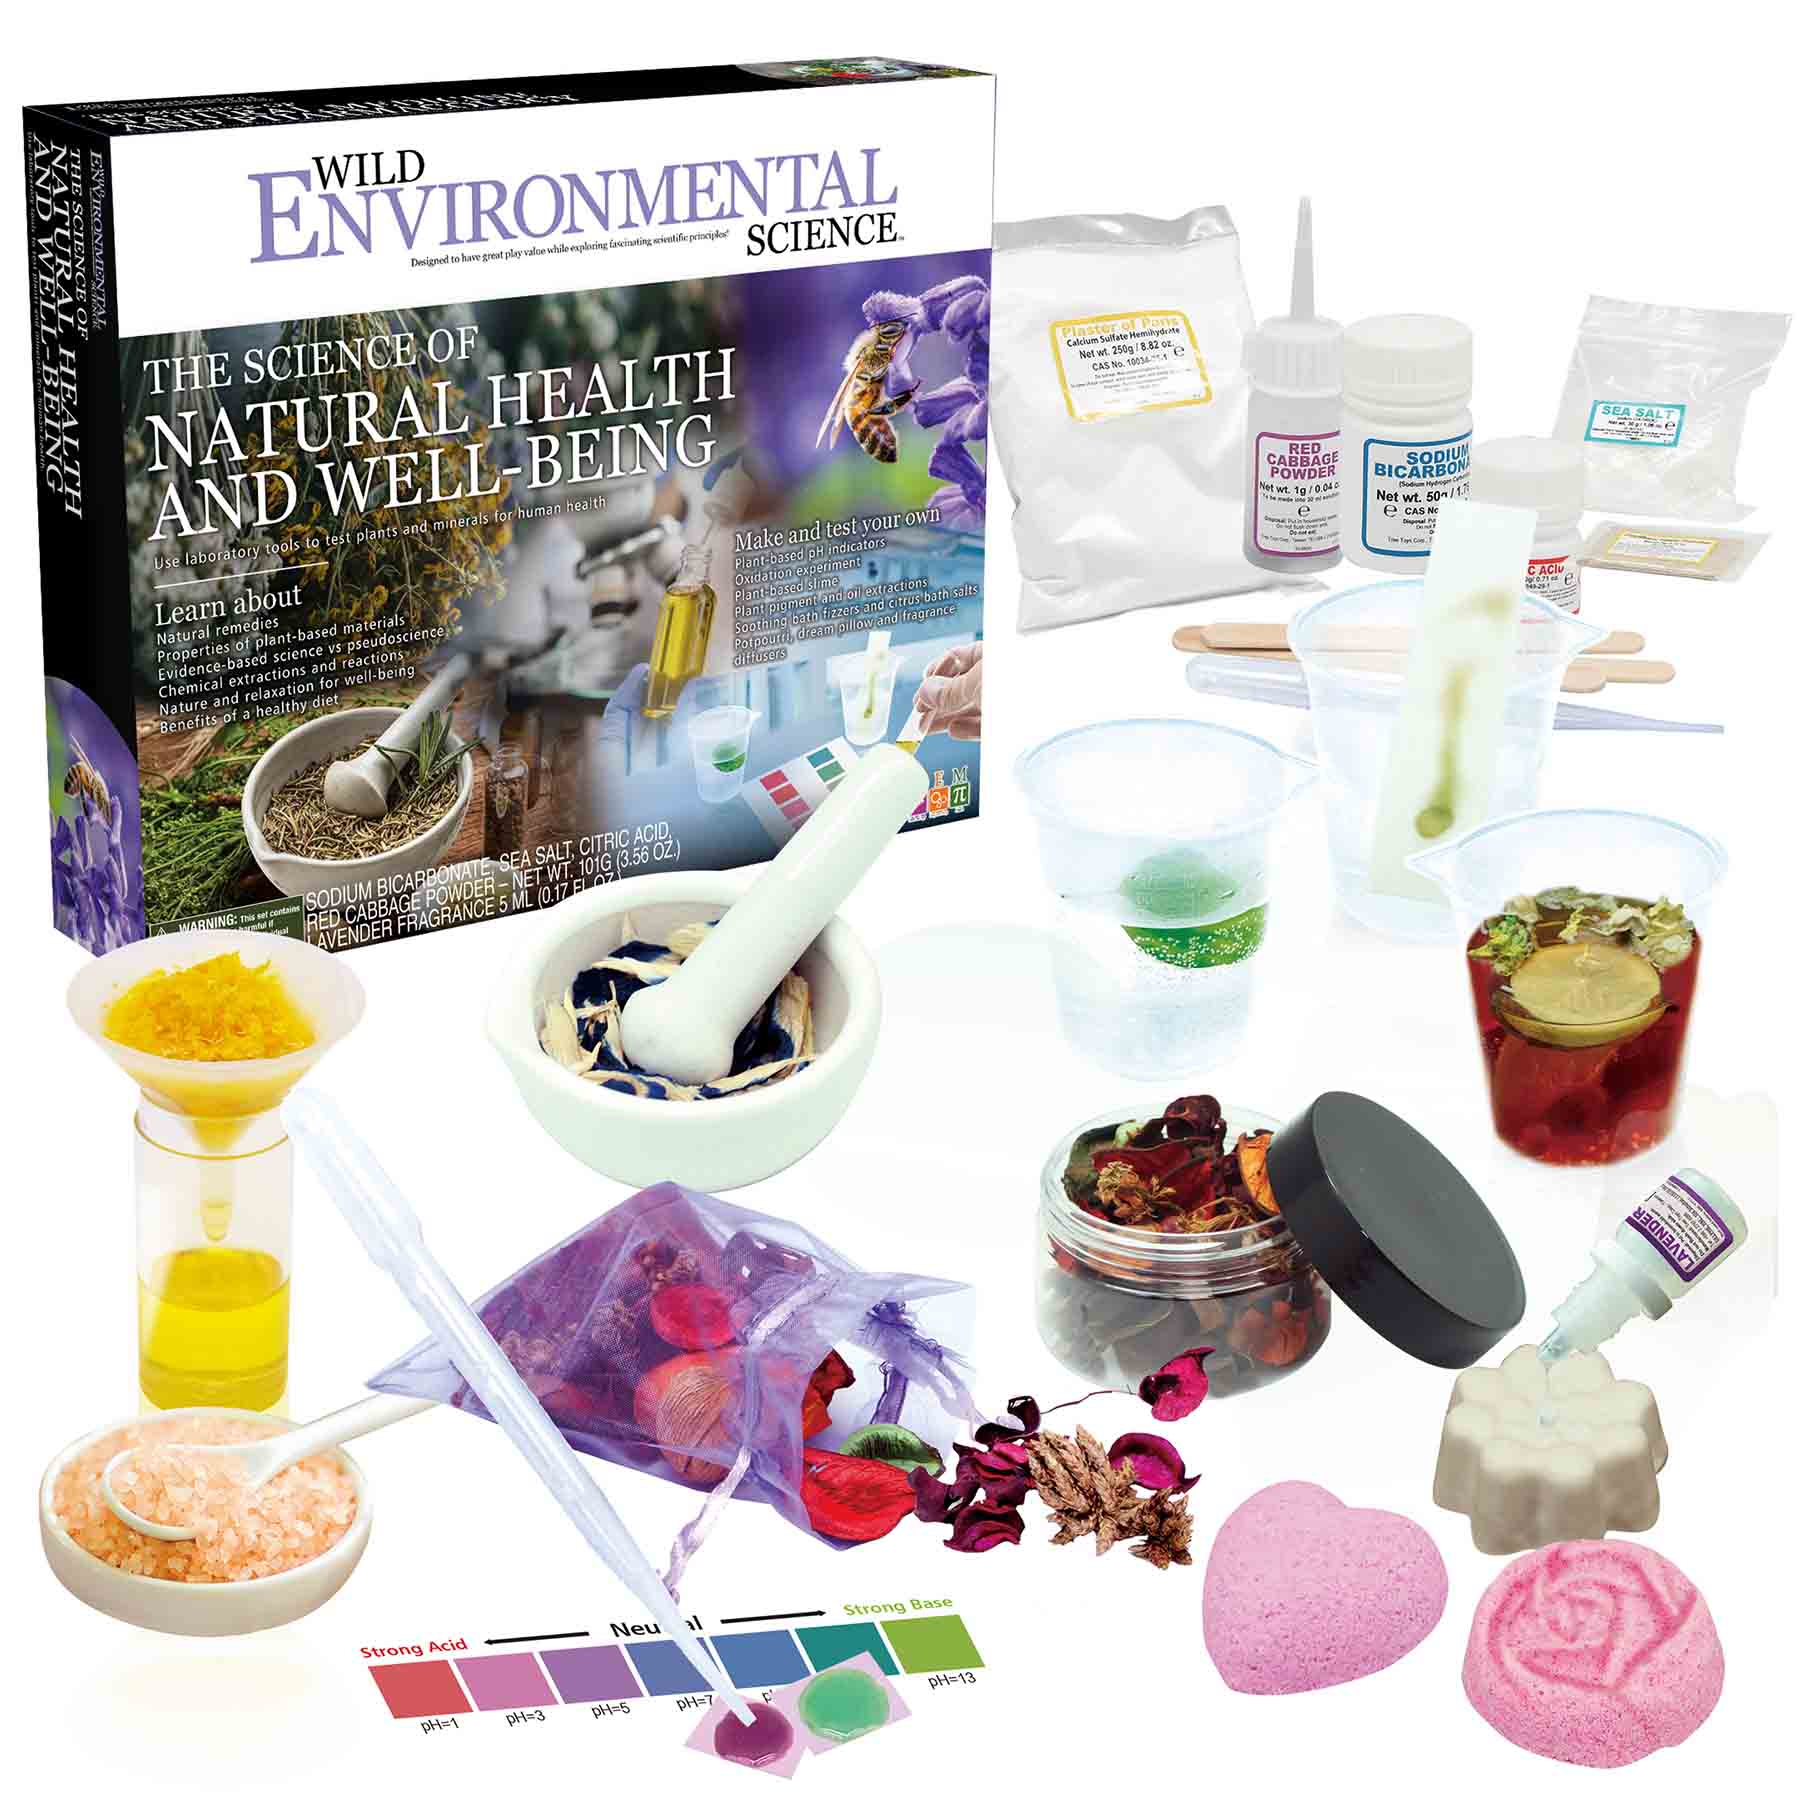 WILD ENVIRONMENTAL SCIENCE Natural Health and Well-Being - STEM Kit for Ages 8+ - Make Your Own Dream Pillow, Potpourri, Fragrance Diffusers and More